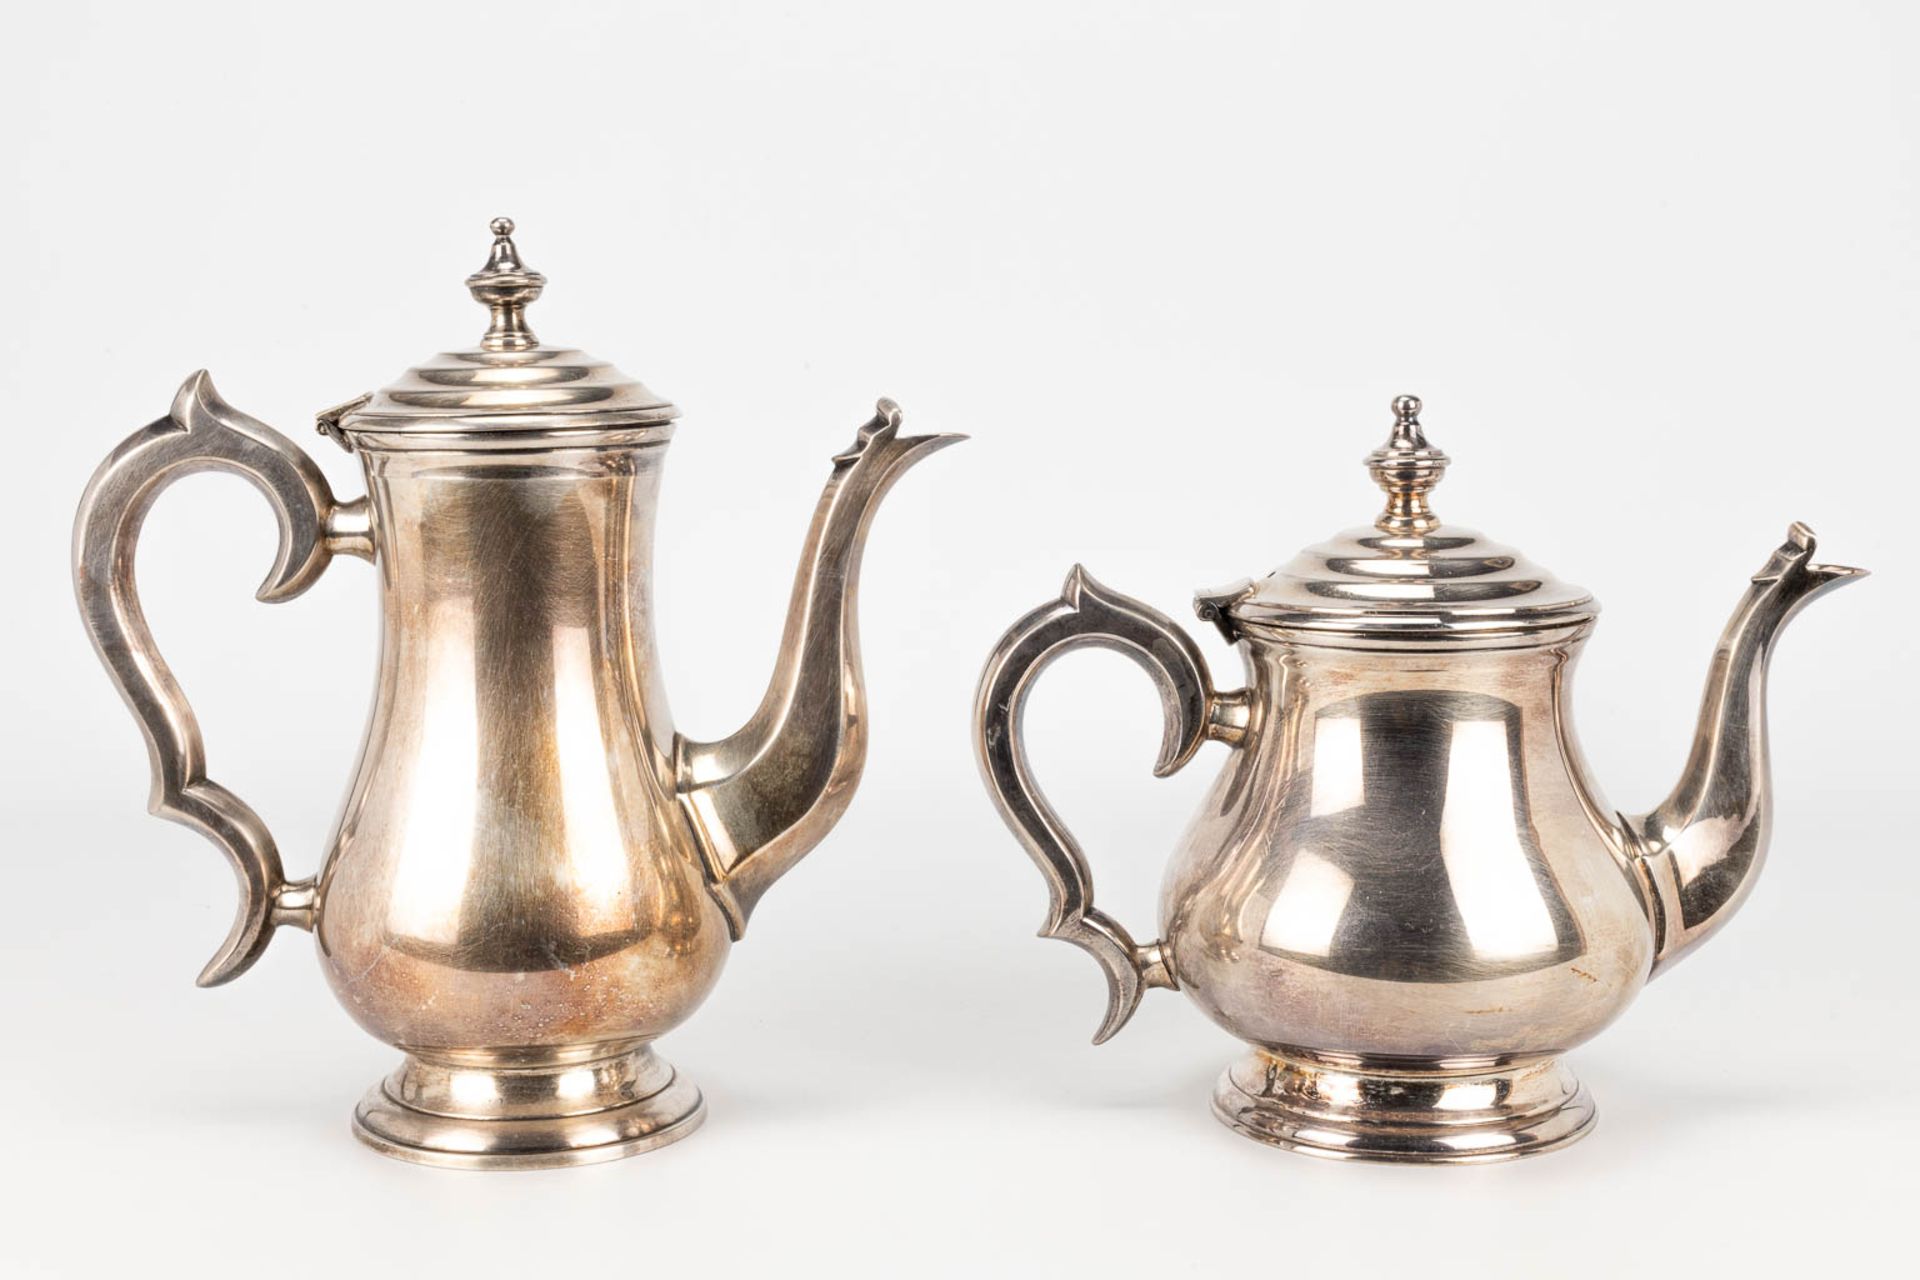 A coffee and tea service made of silver-plated metal. - Image 7 of 15